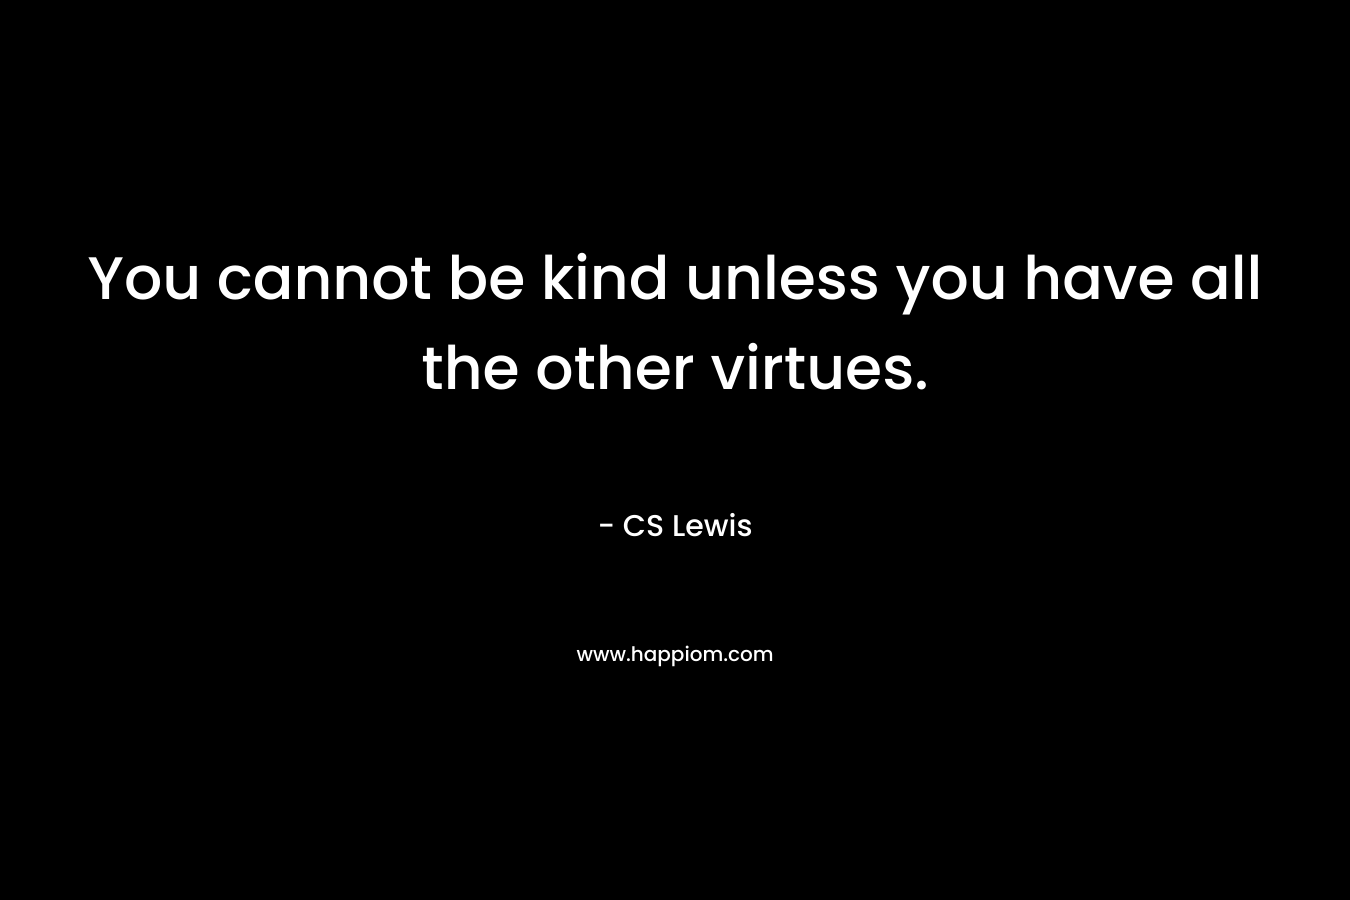 You cannot be kind unless you have all the other virtues.